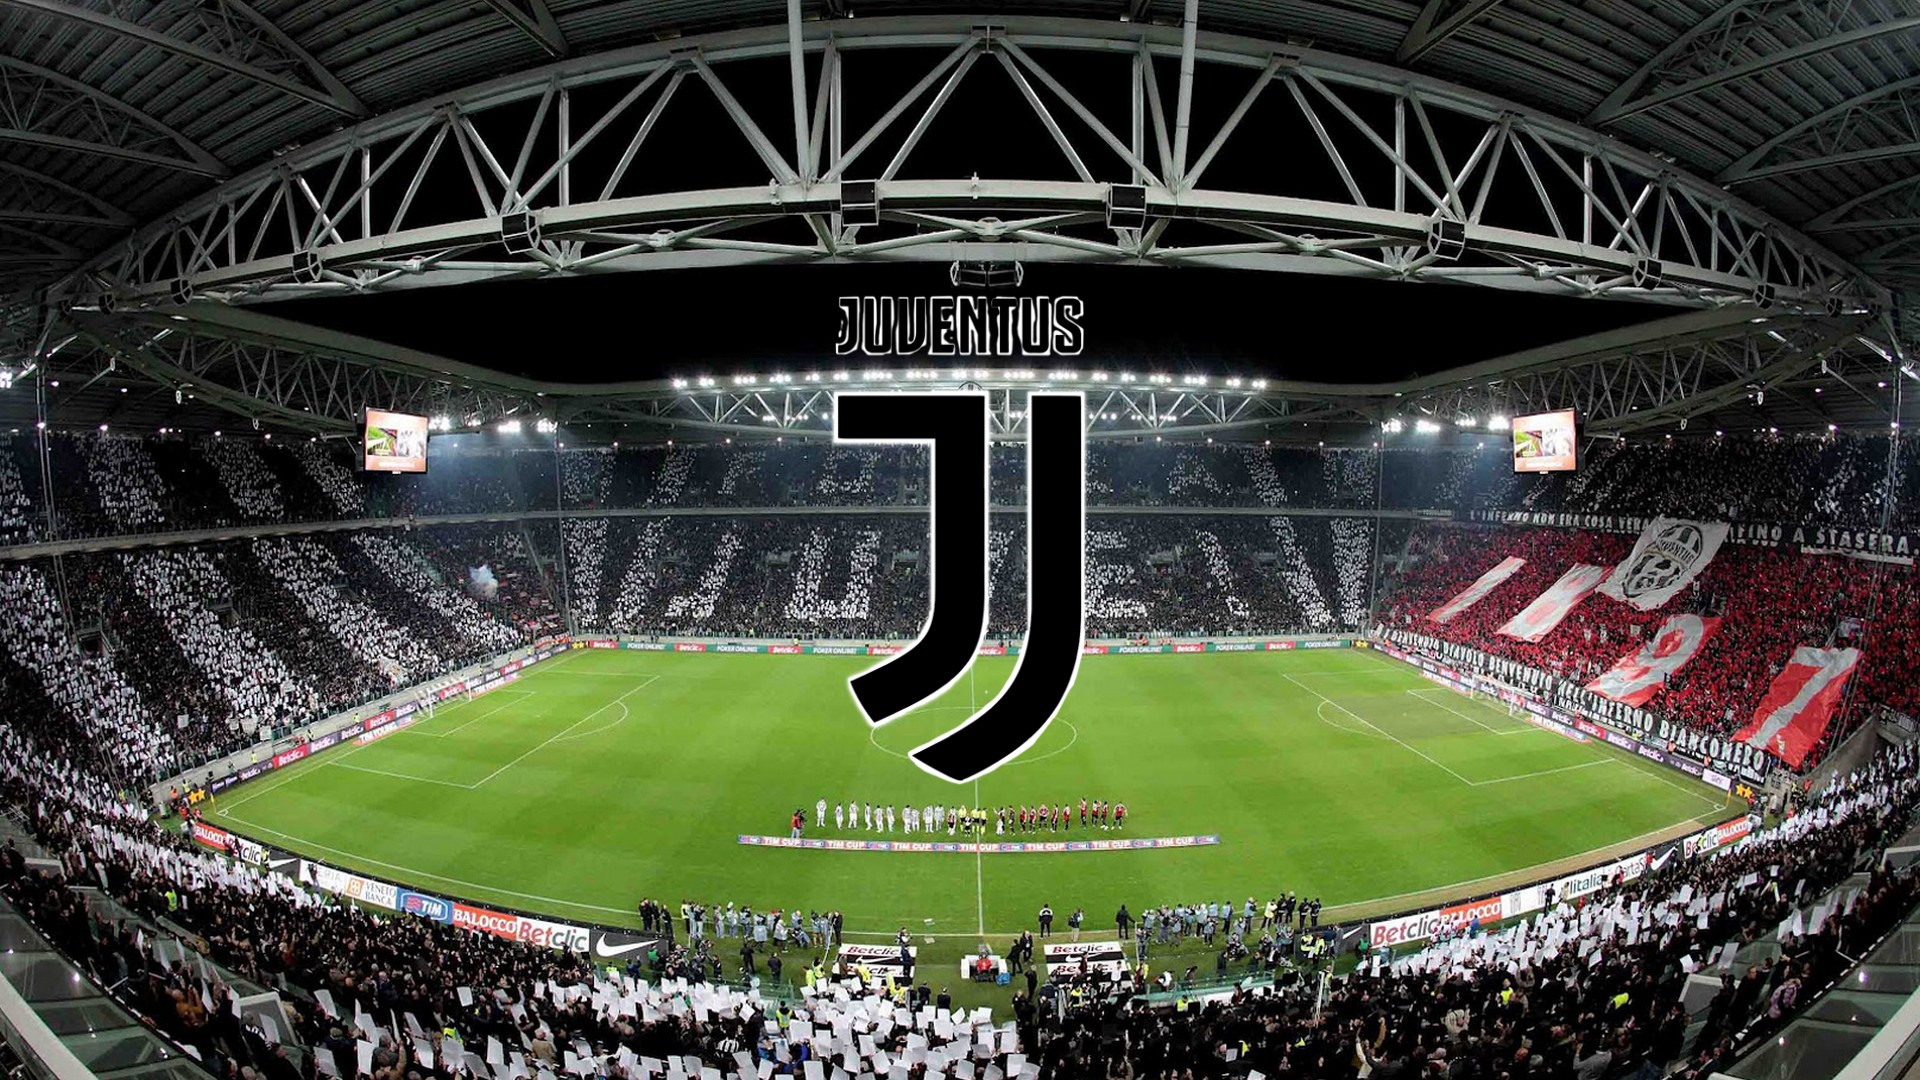 Juventus Wallpaper With Resolution 1920X1080 pixel. You can make this wallpaper for your Mac or Windows Desktop Background, iPhone, Android or Tablet and another Smartphone device for free